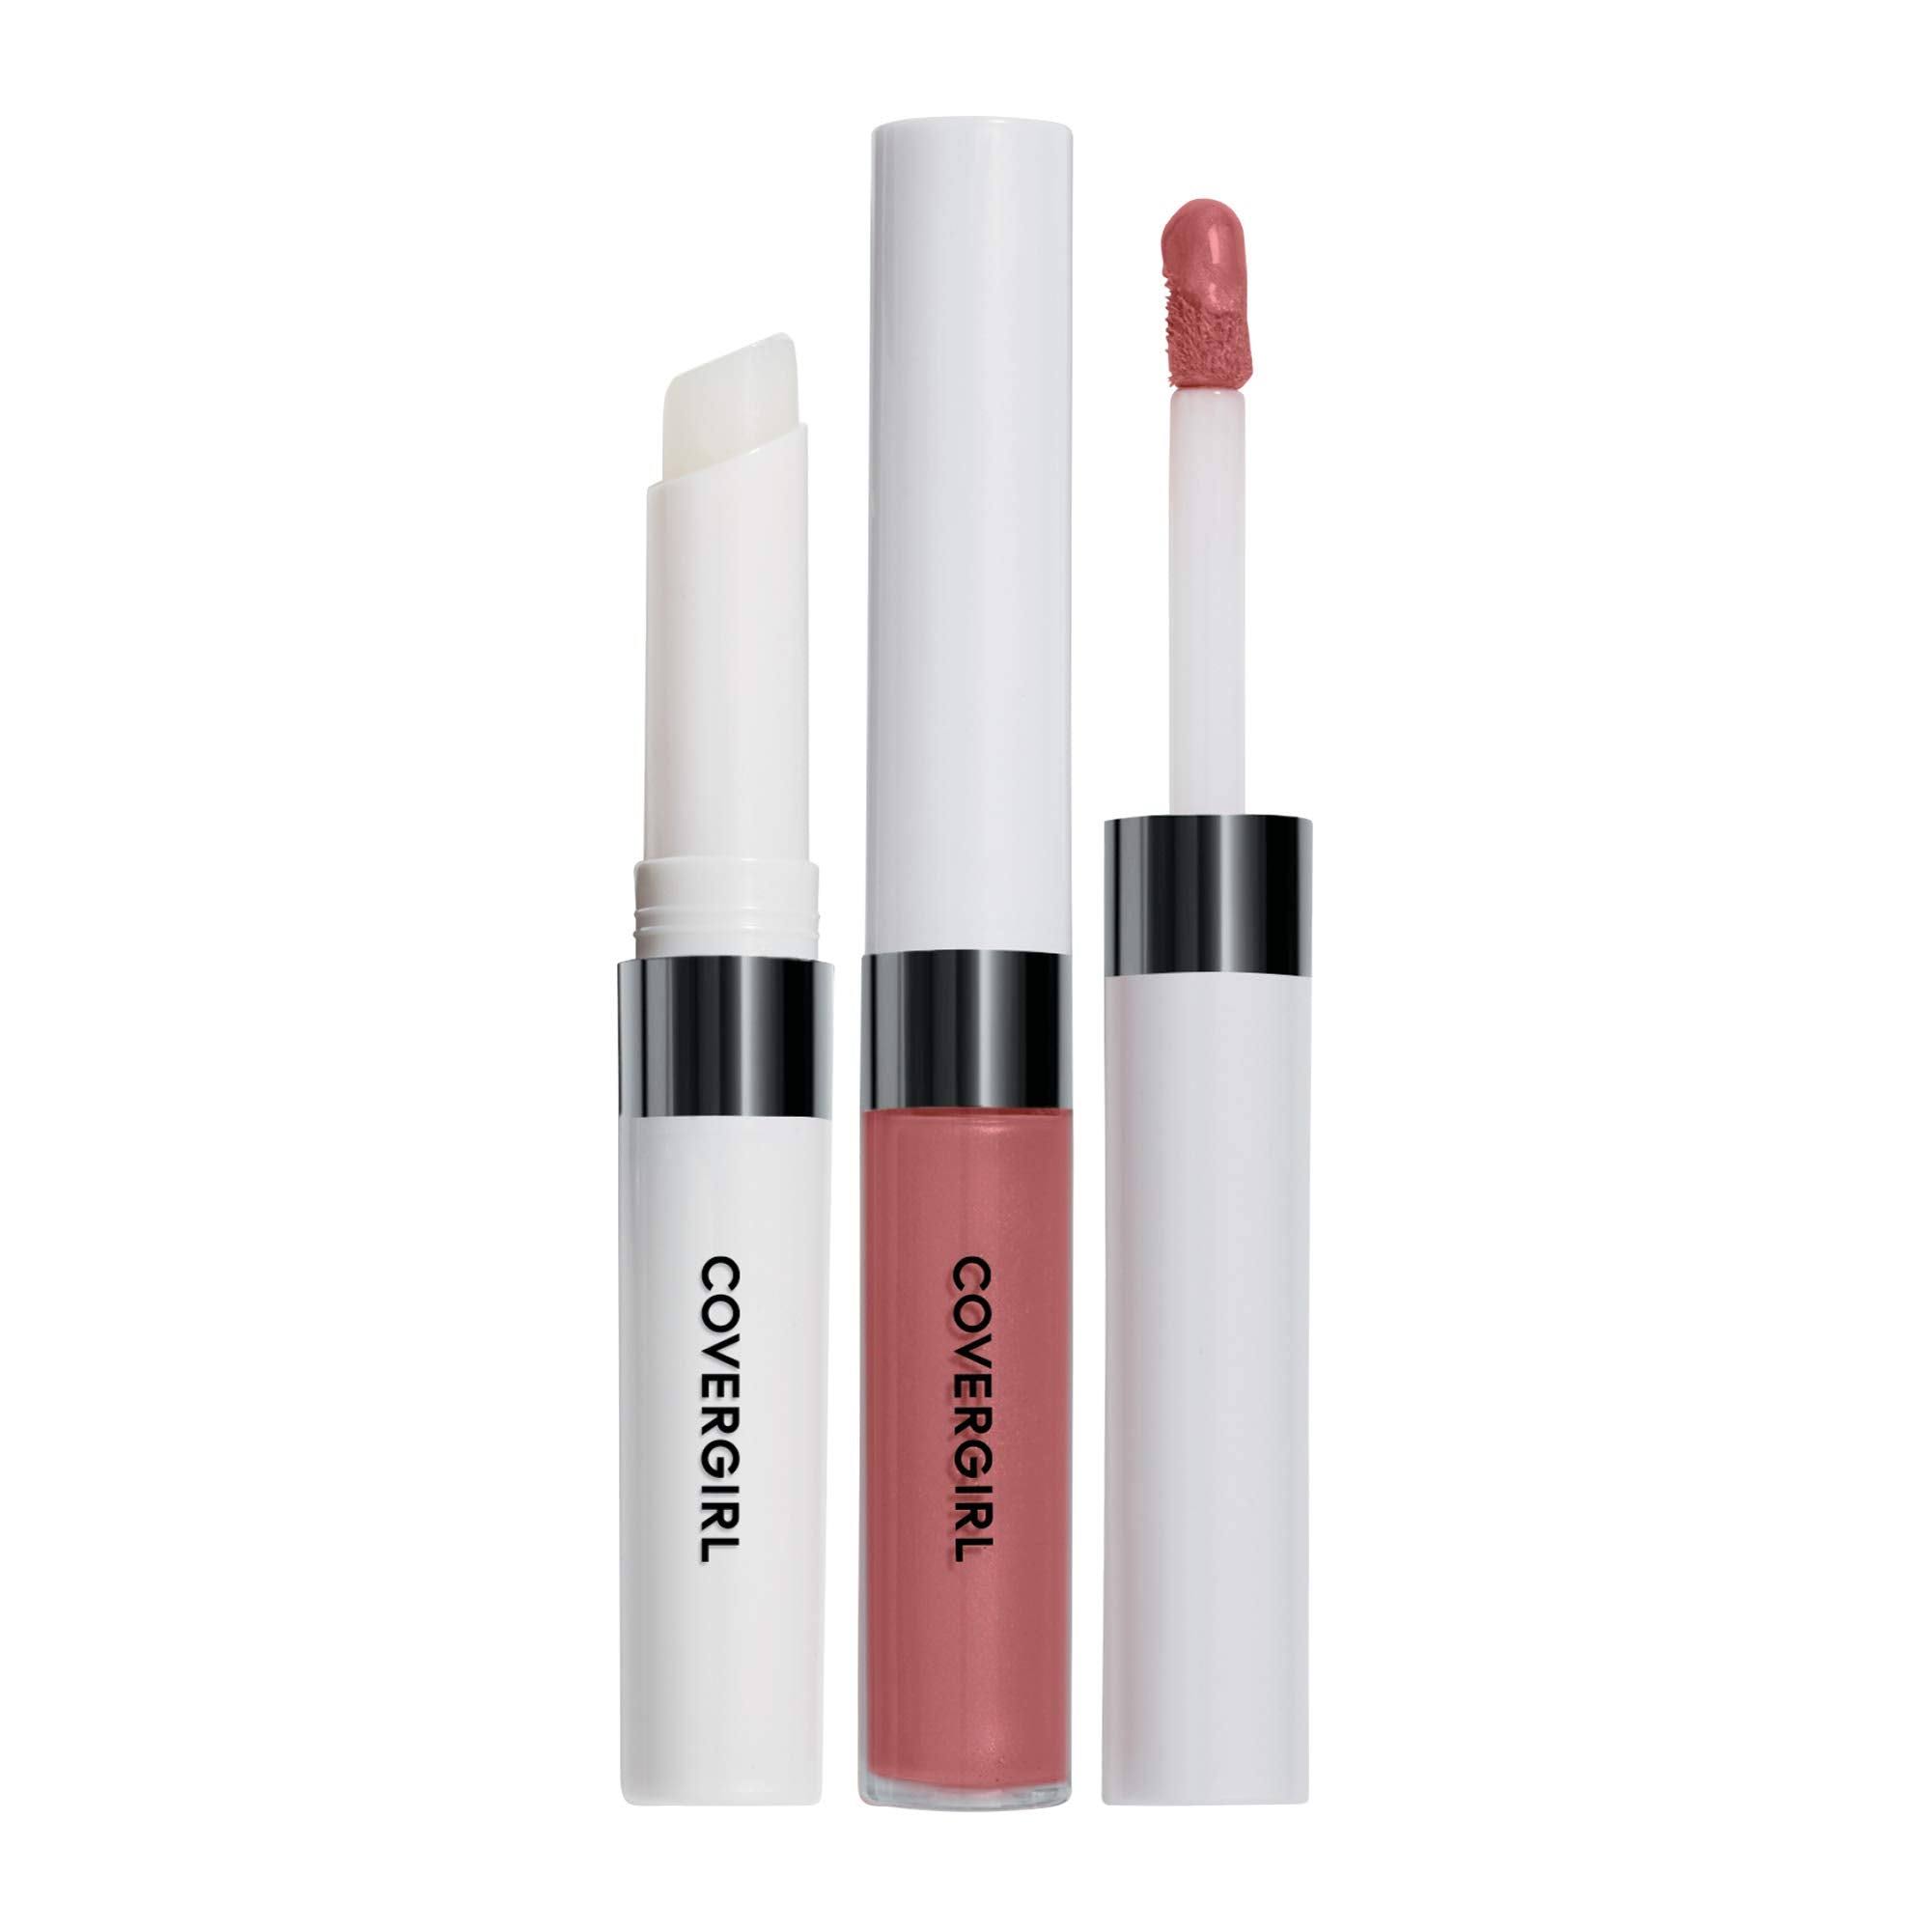 COVERGIRL Outlast All-Day Moisturizing Lip Color - Natural Blush 621, .13oz